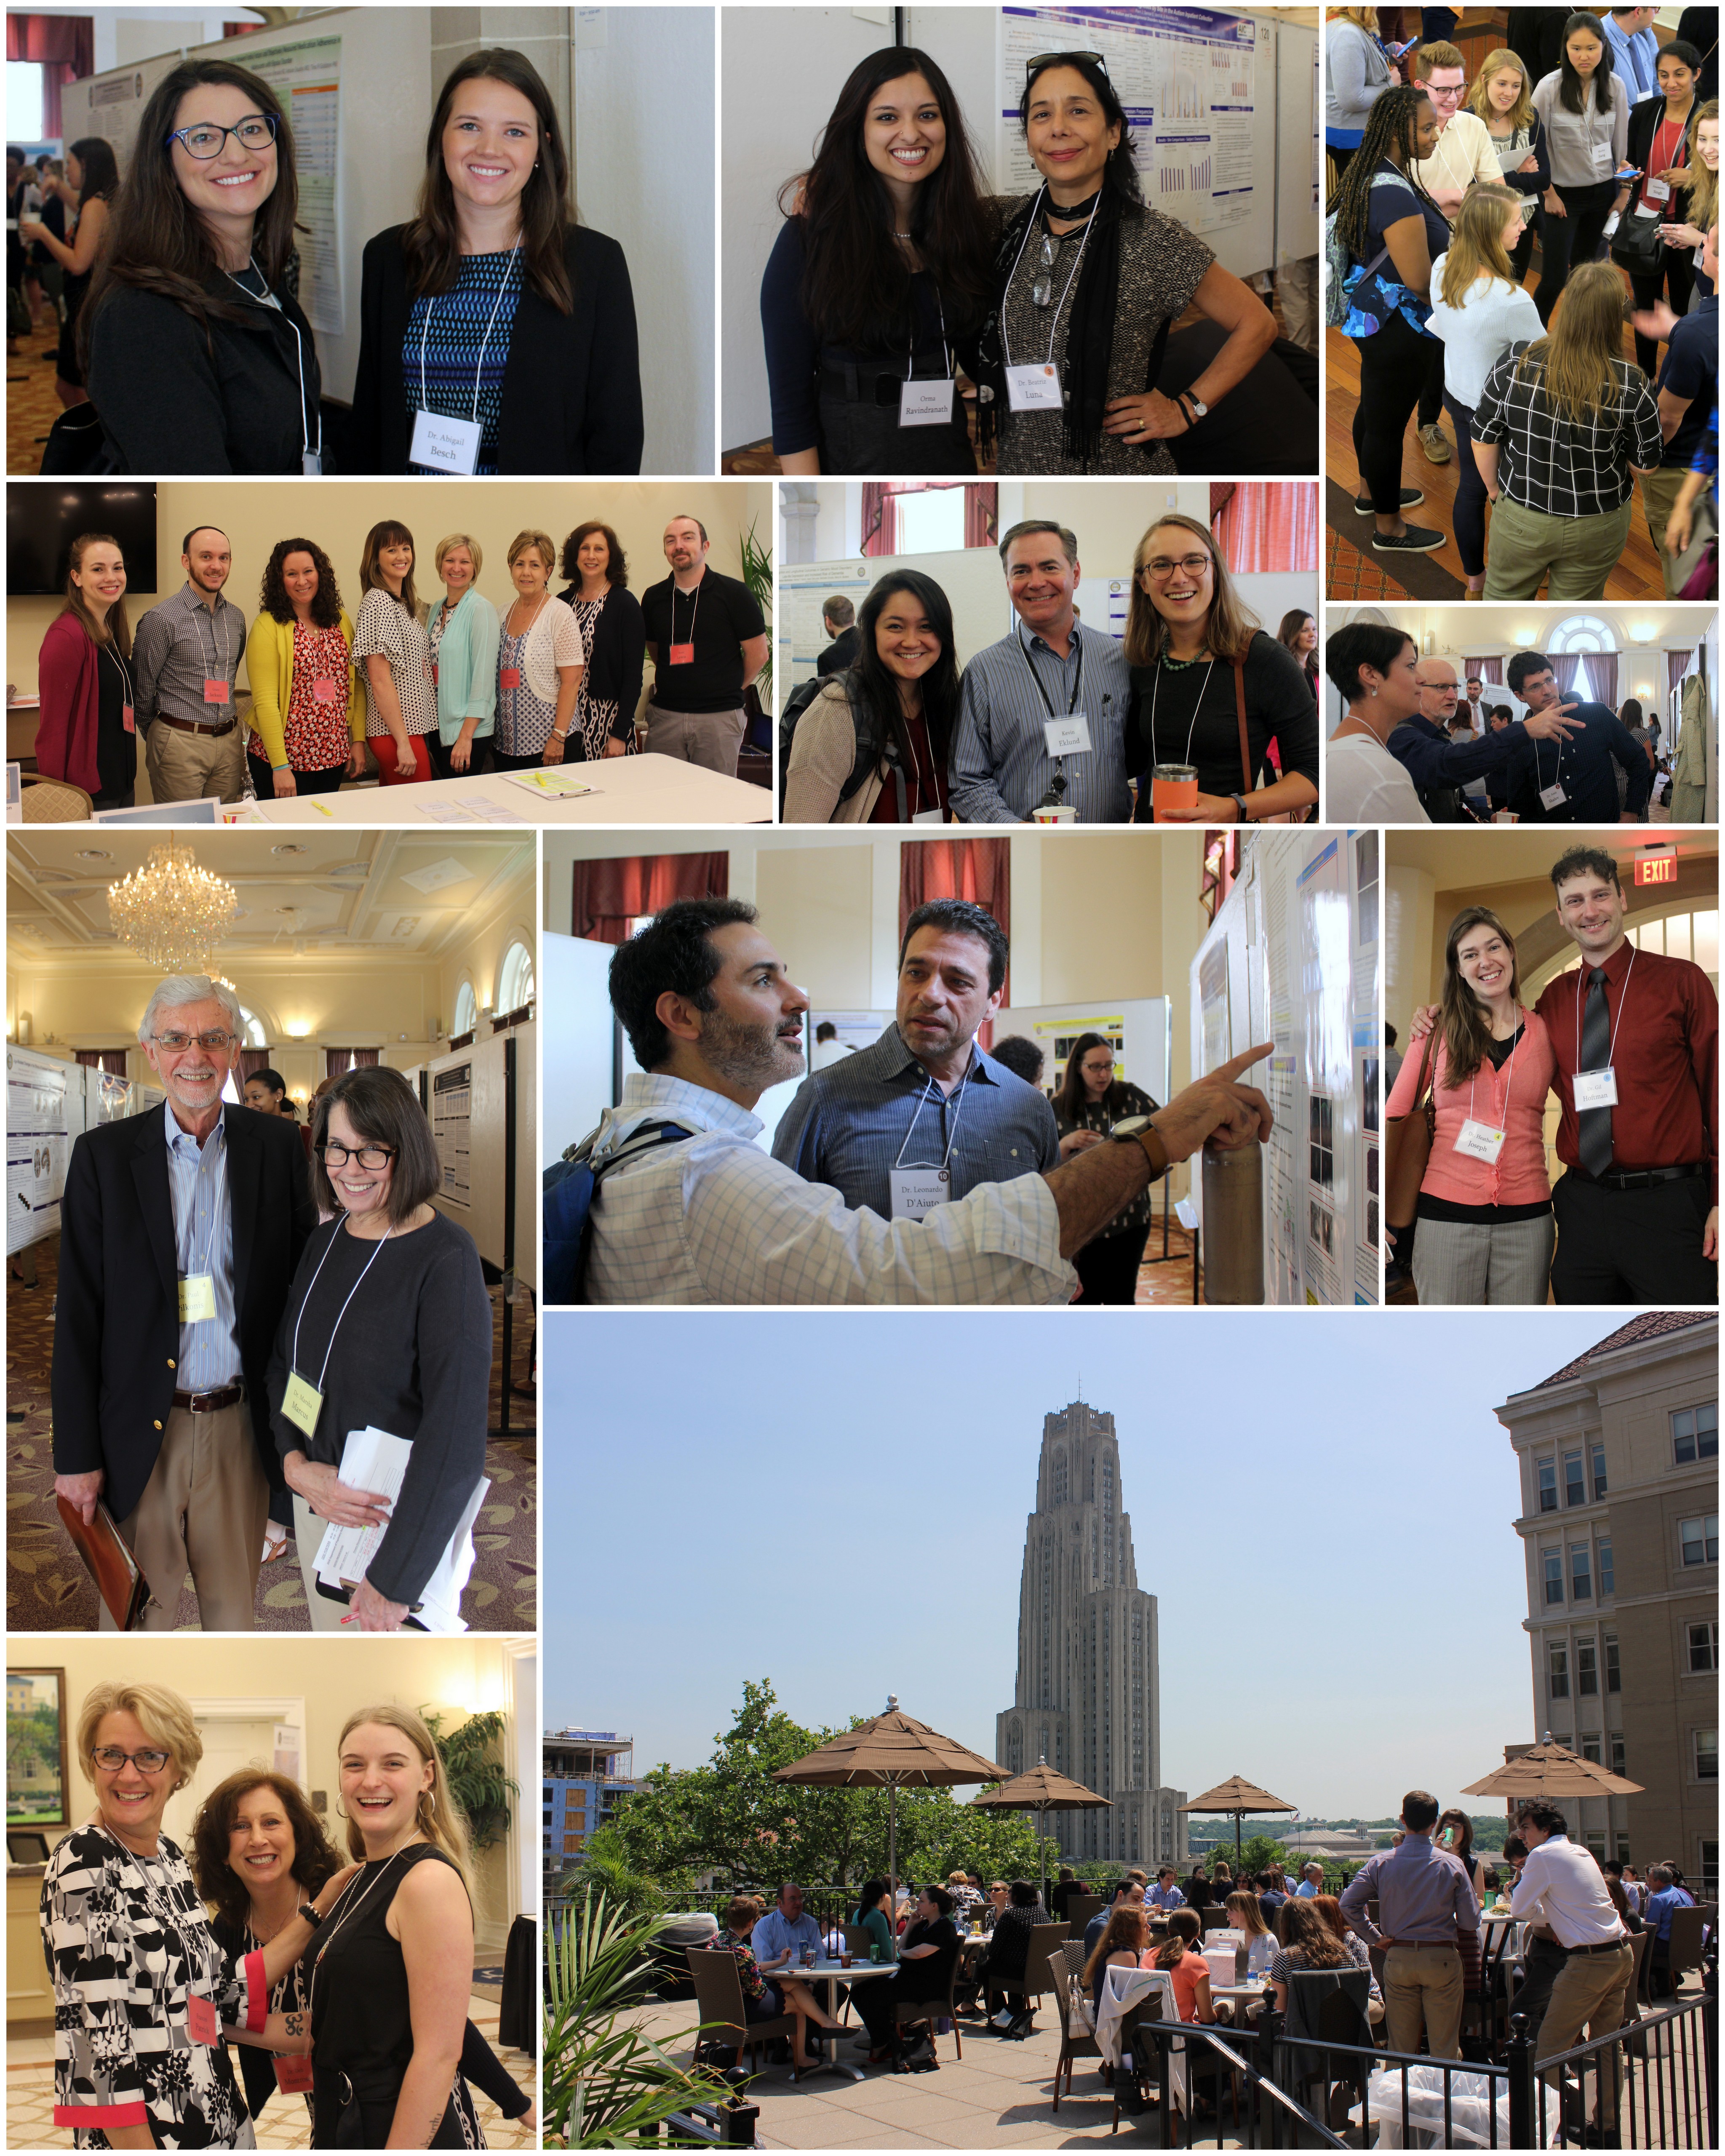 18th Annual Pitt Department of Psychiatry Research Day